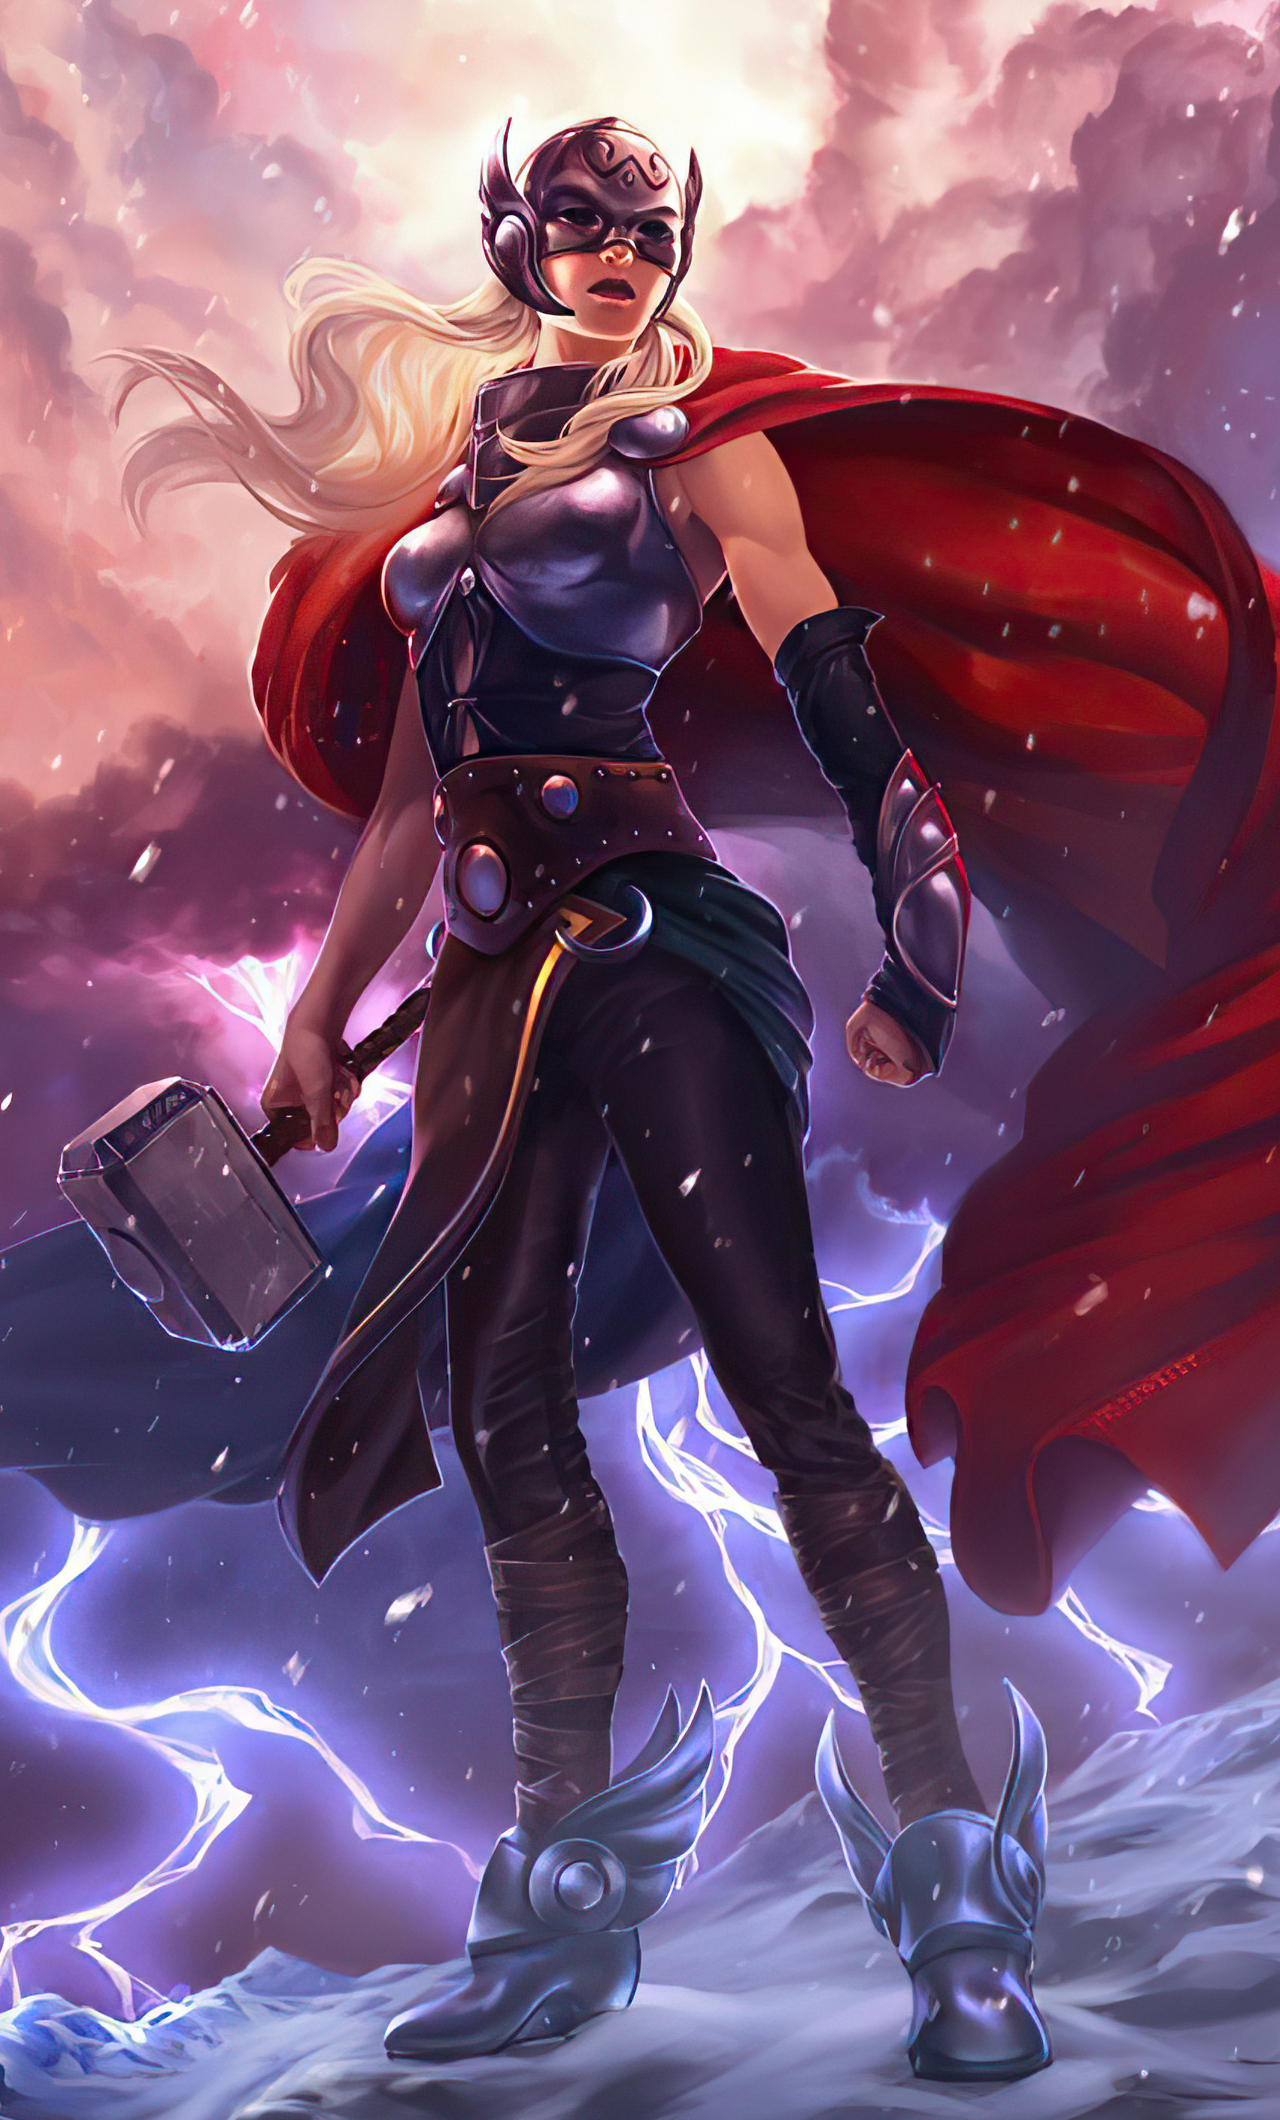 Lady Thor Art iPhone HD 4k Wallpaper, Image, Background, Photo and Picture